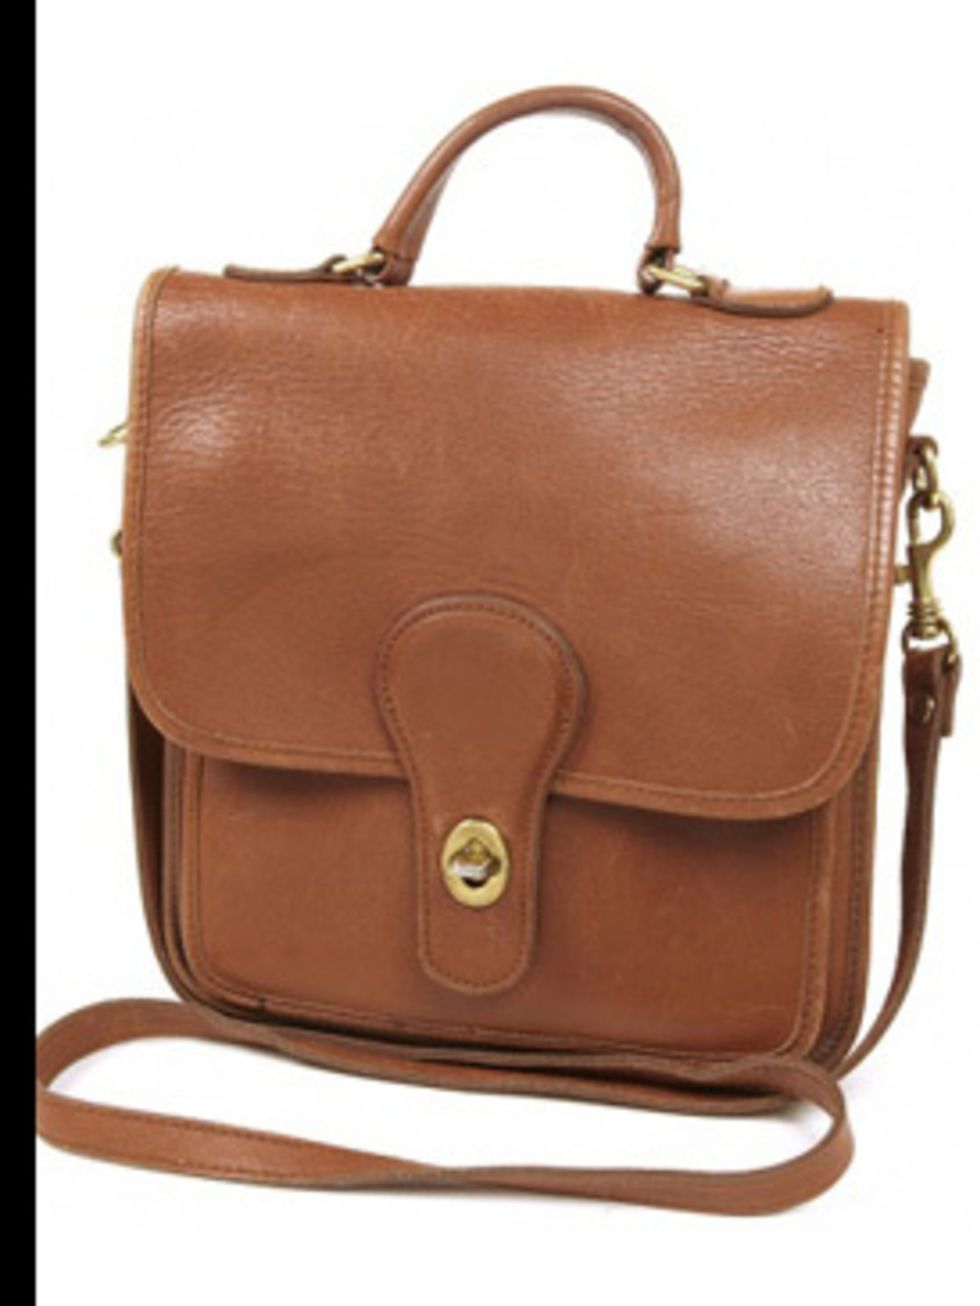 <p>Bag, £40.00 at <a href="http://www.rokit.co.uk/product.php?product_id=WA100470">Rokit</a></p>